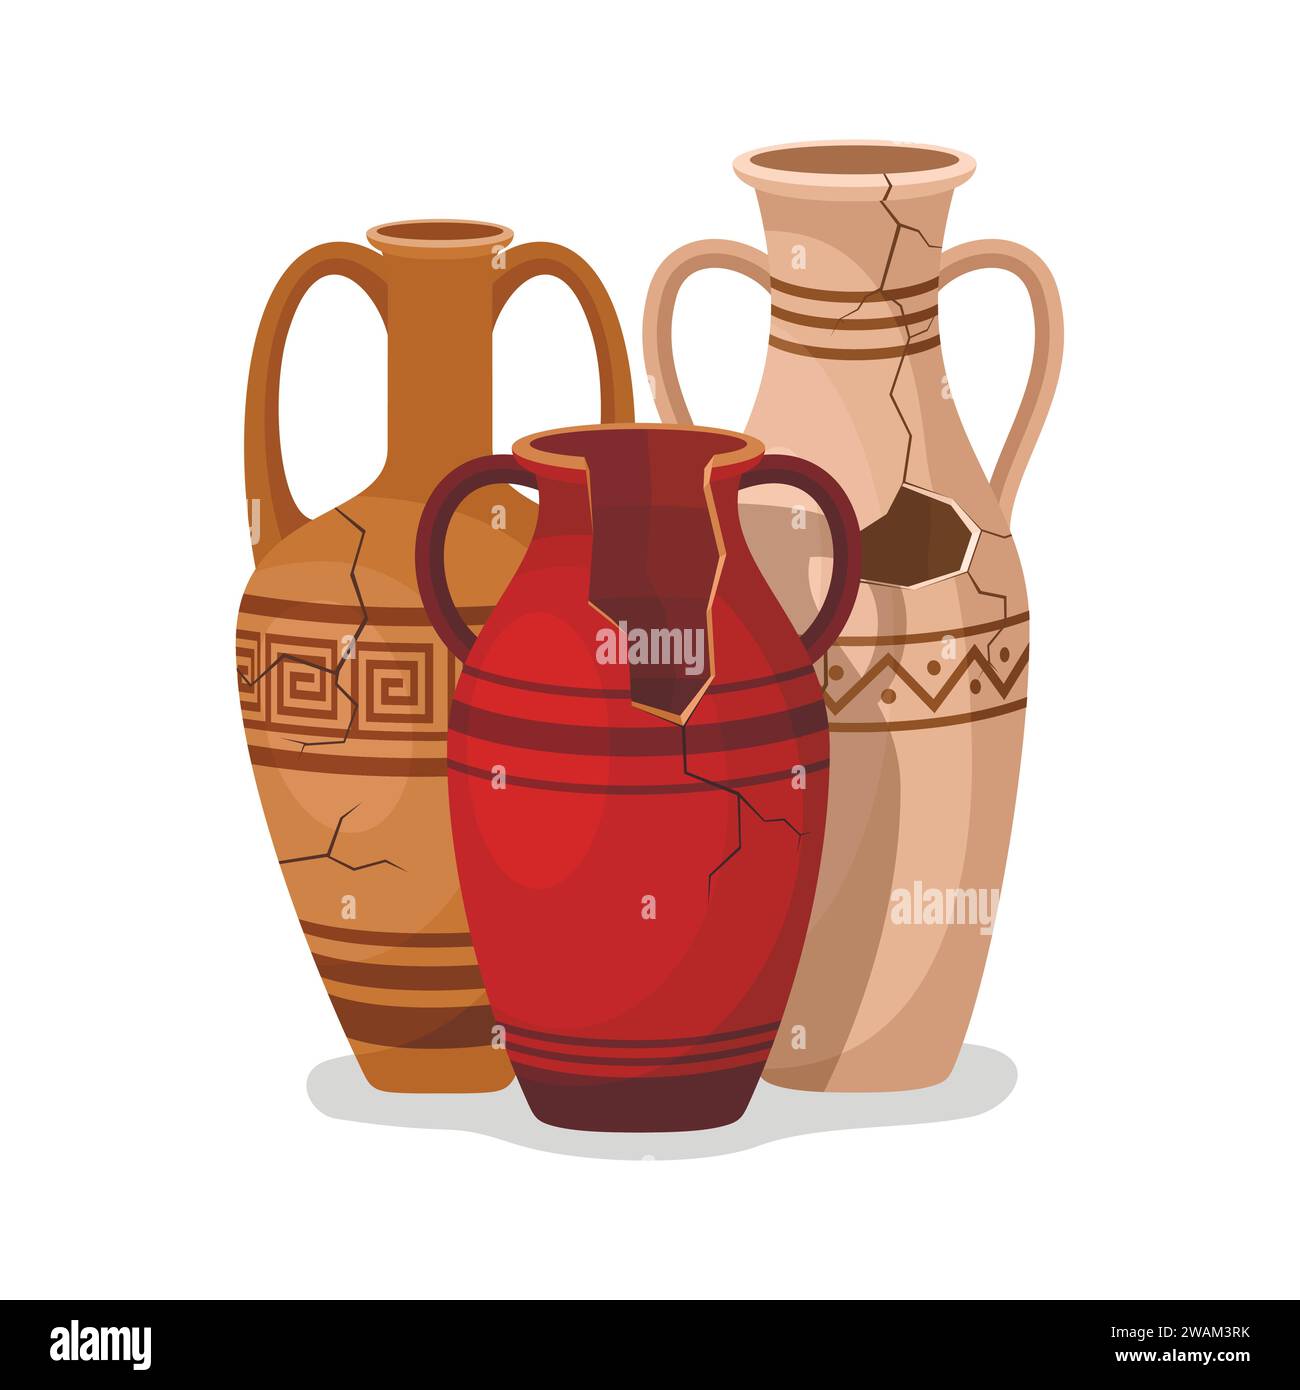 Set of antique amphora with two handles. Broken ancient clay vases jars, Old traditional vintage pot. Ceramic jug archaeological artefacts. Greek or R Stock Vector